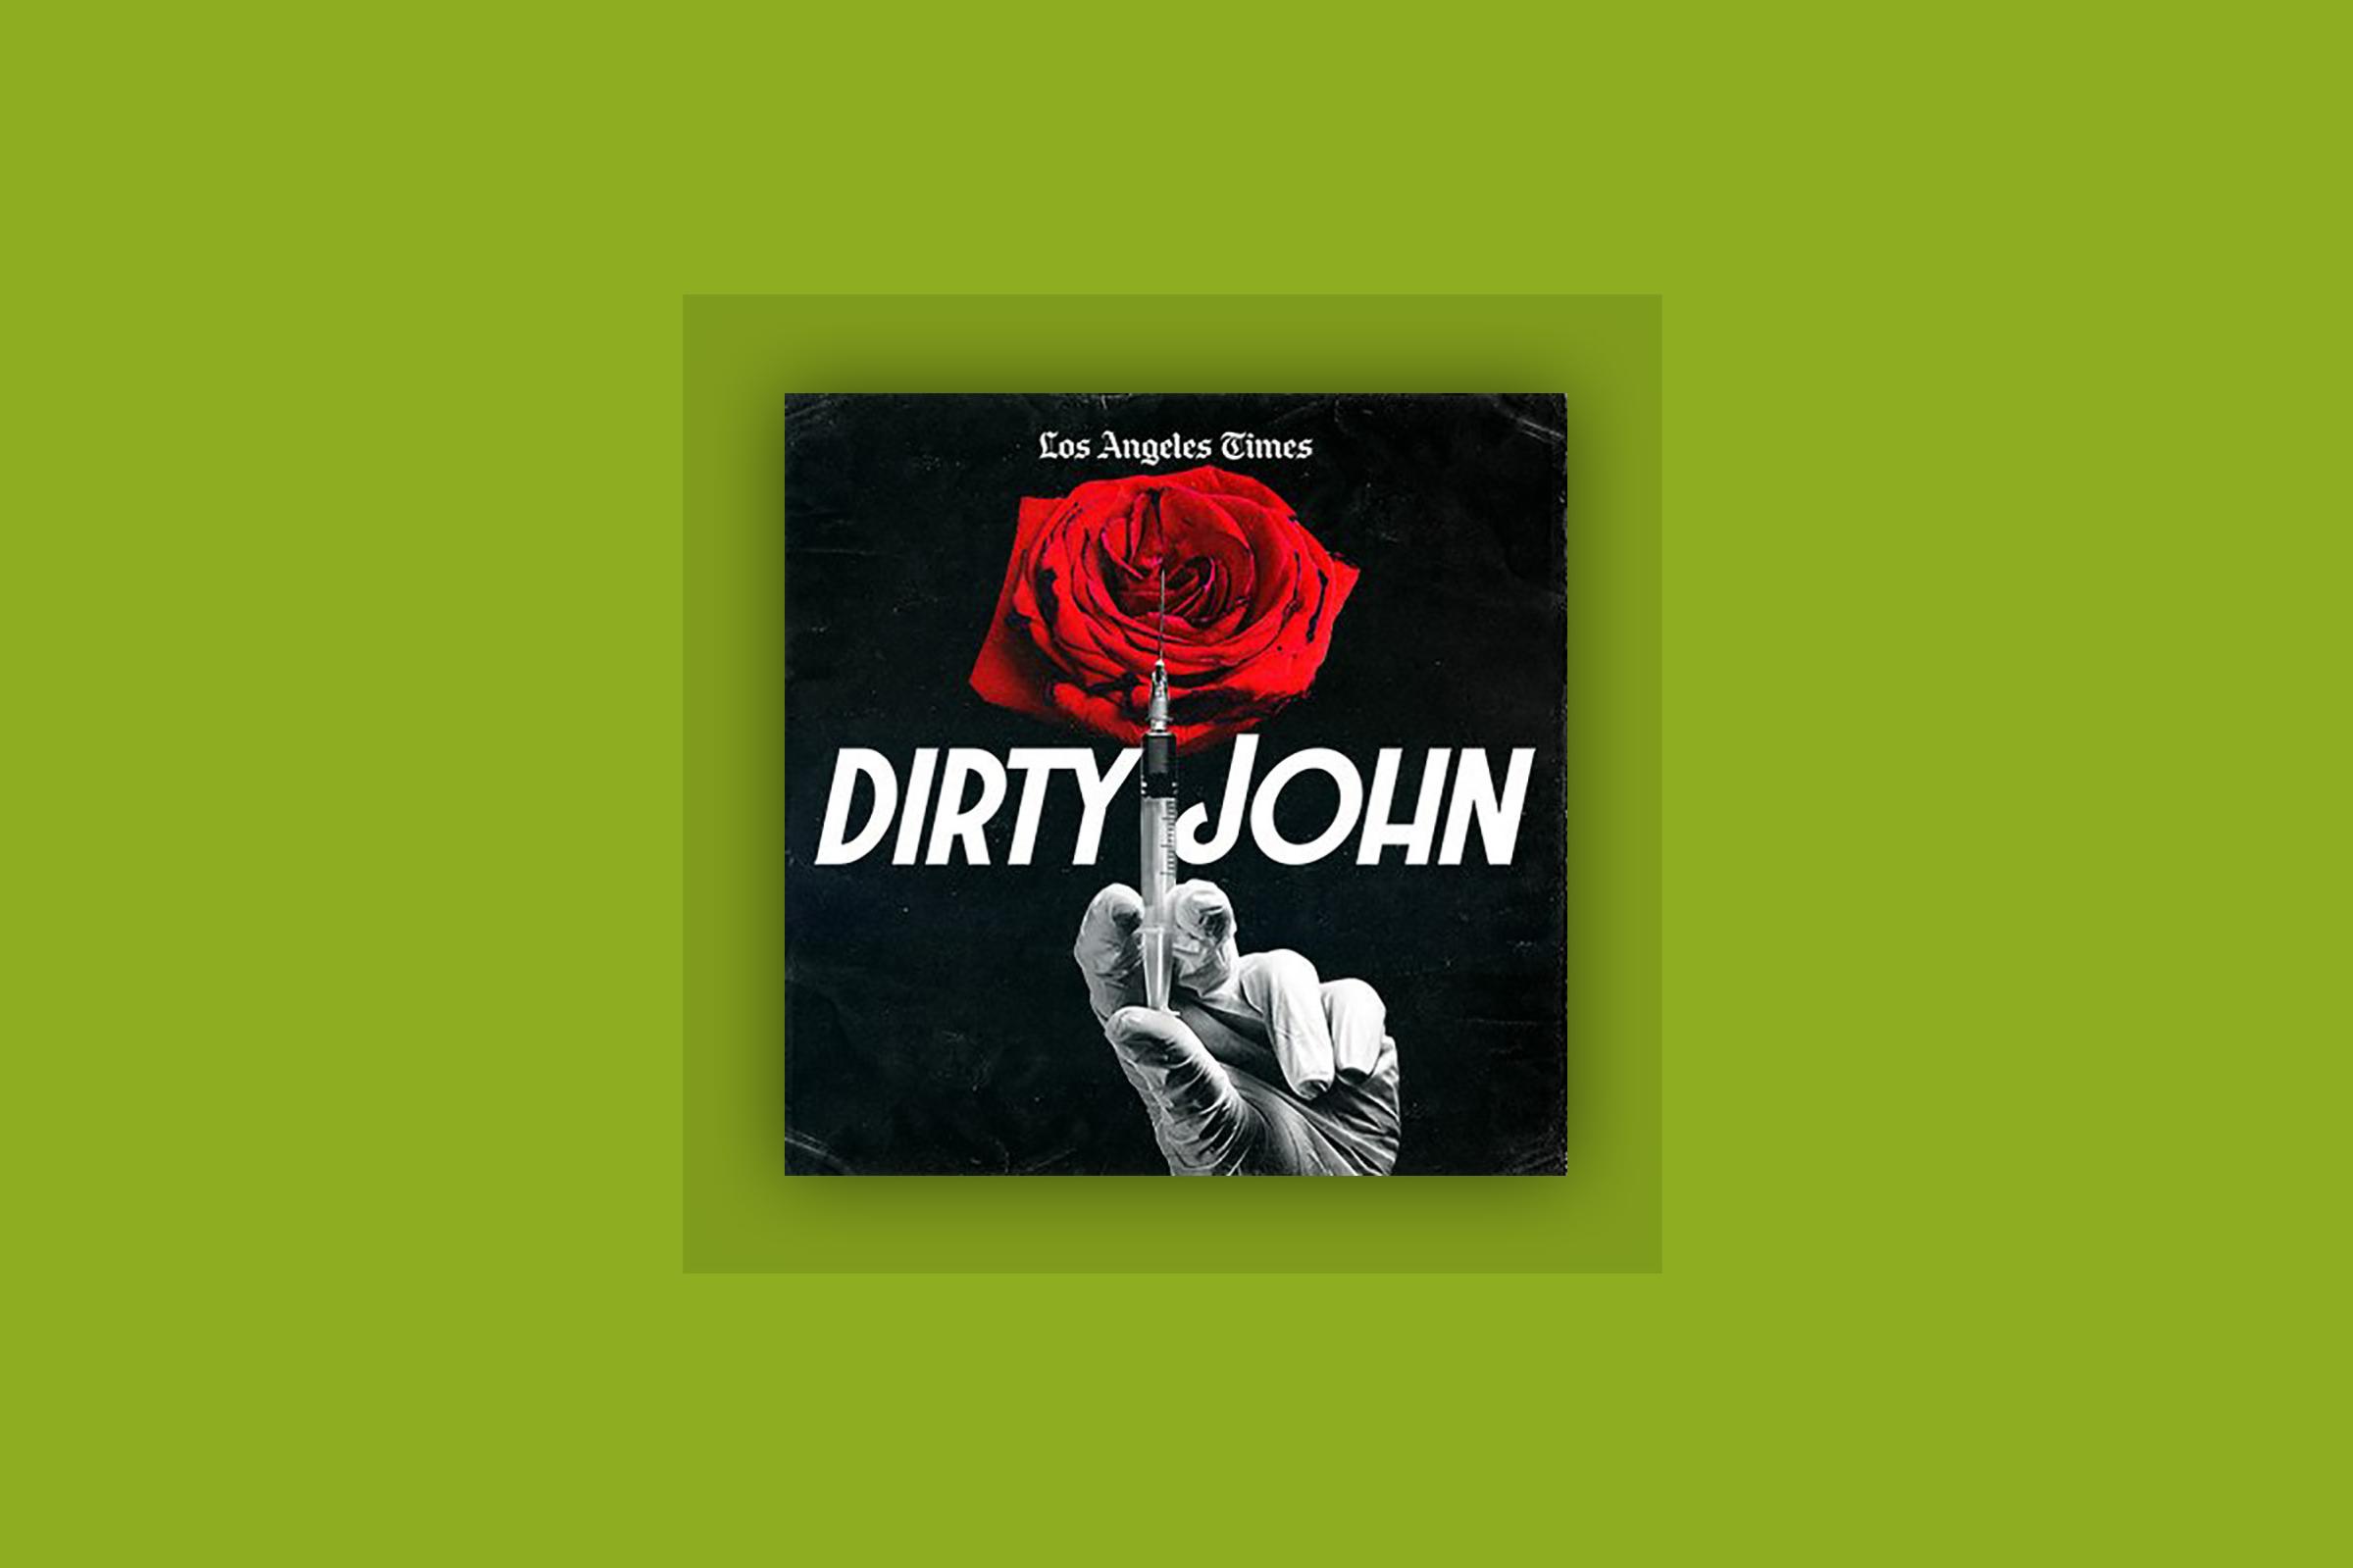 Dirty John The Los Angeles Times podcast